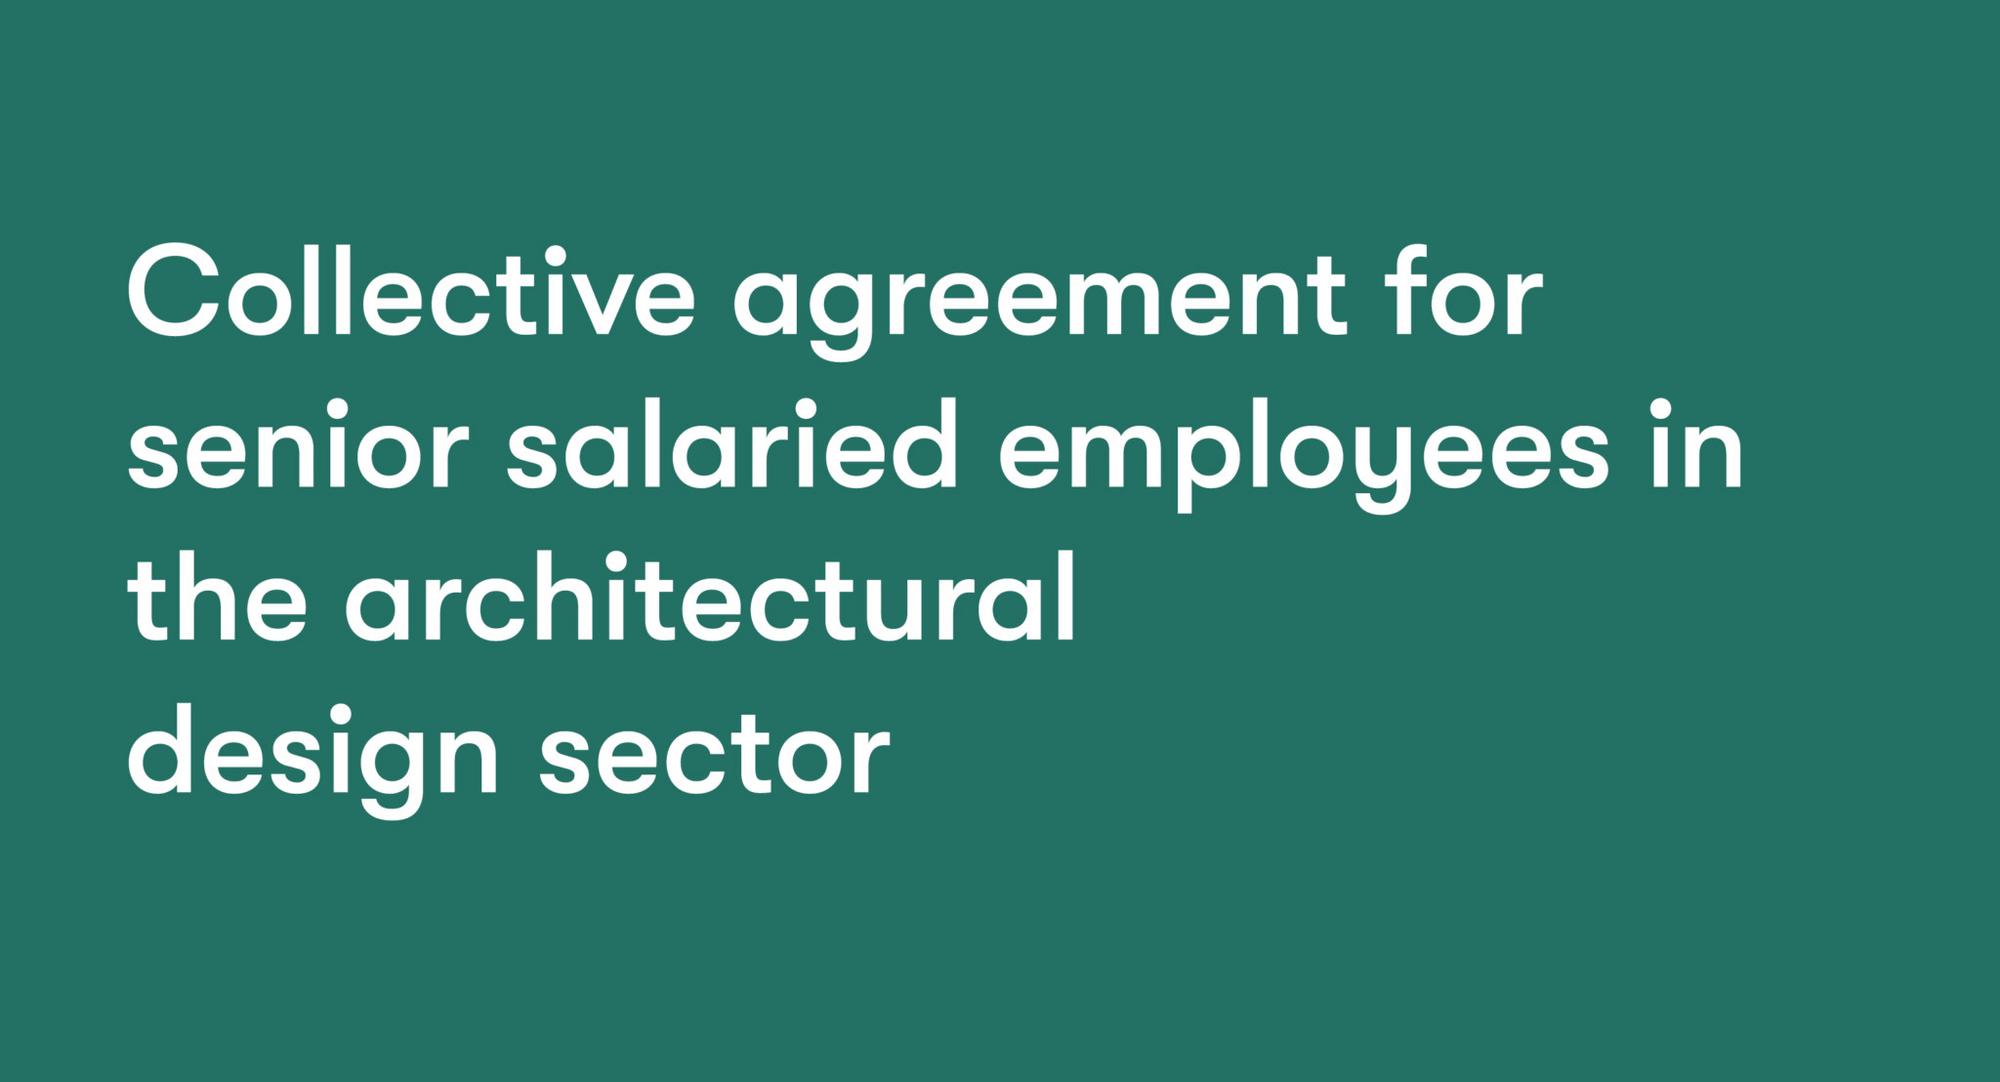 The new collective agreement for the architectural design sector now